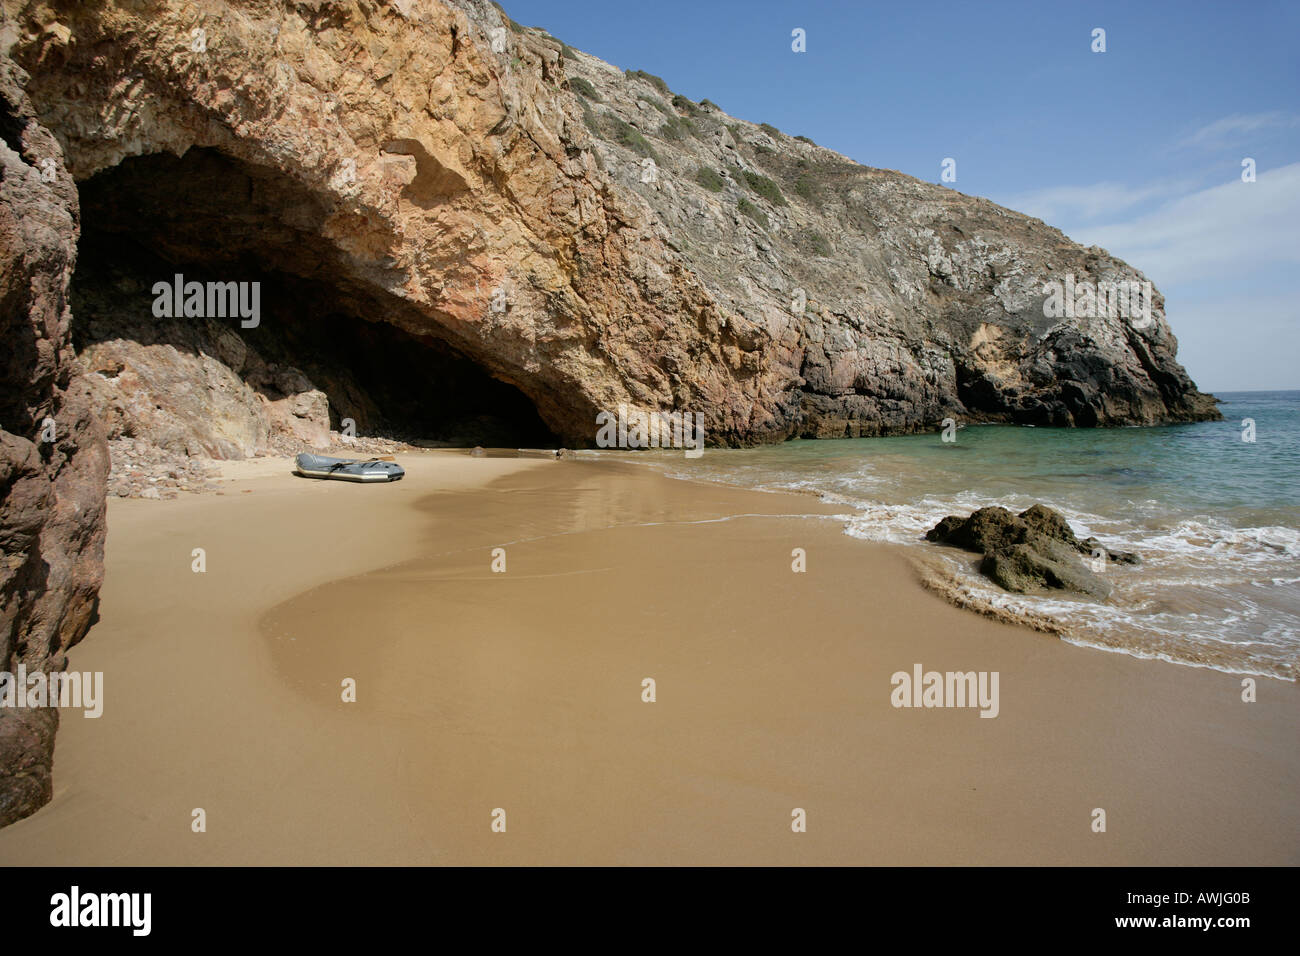 An inflatable dinghy pulled up onto secluded sandy beach next to a cave This beach is off Portugals Algarve coast Stock Photo